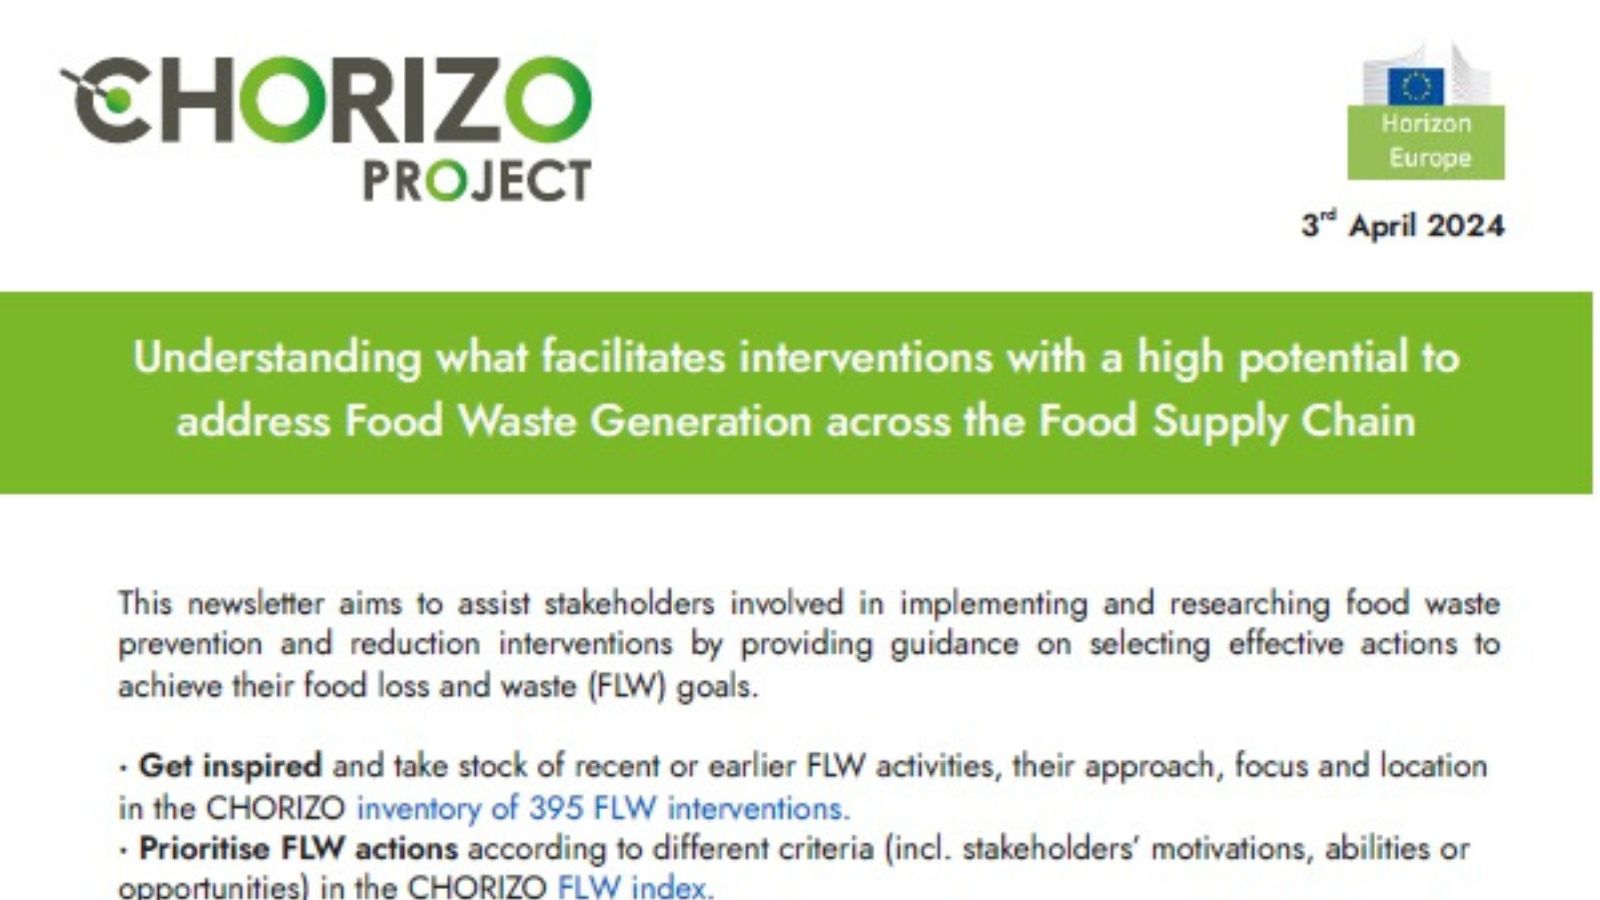 CHORIZO #5 Newsletter is out! Understanding what facilitates interventions with a high potential to address Food Waste Generation across the Food Supply Chain